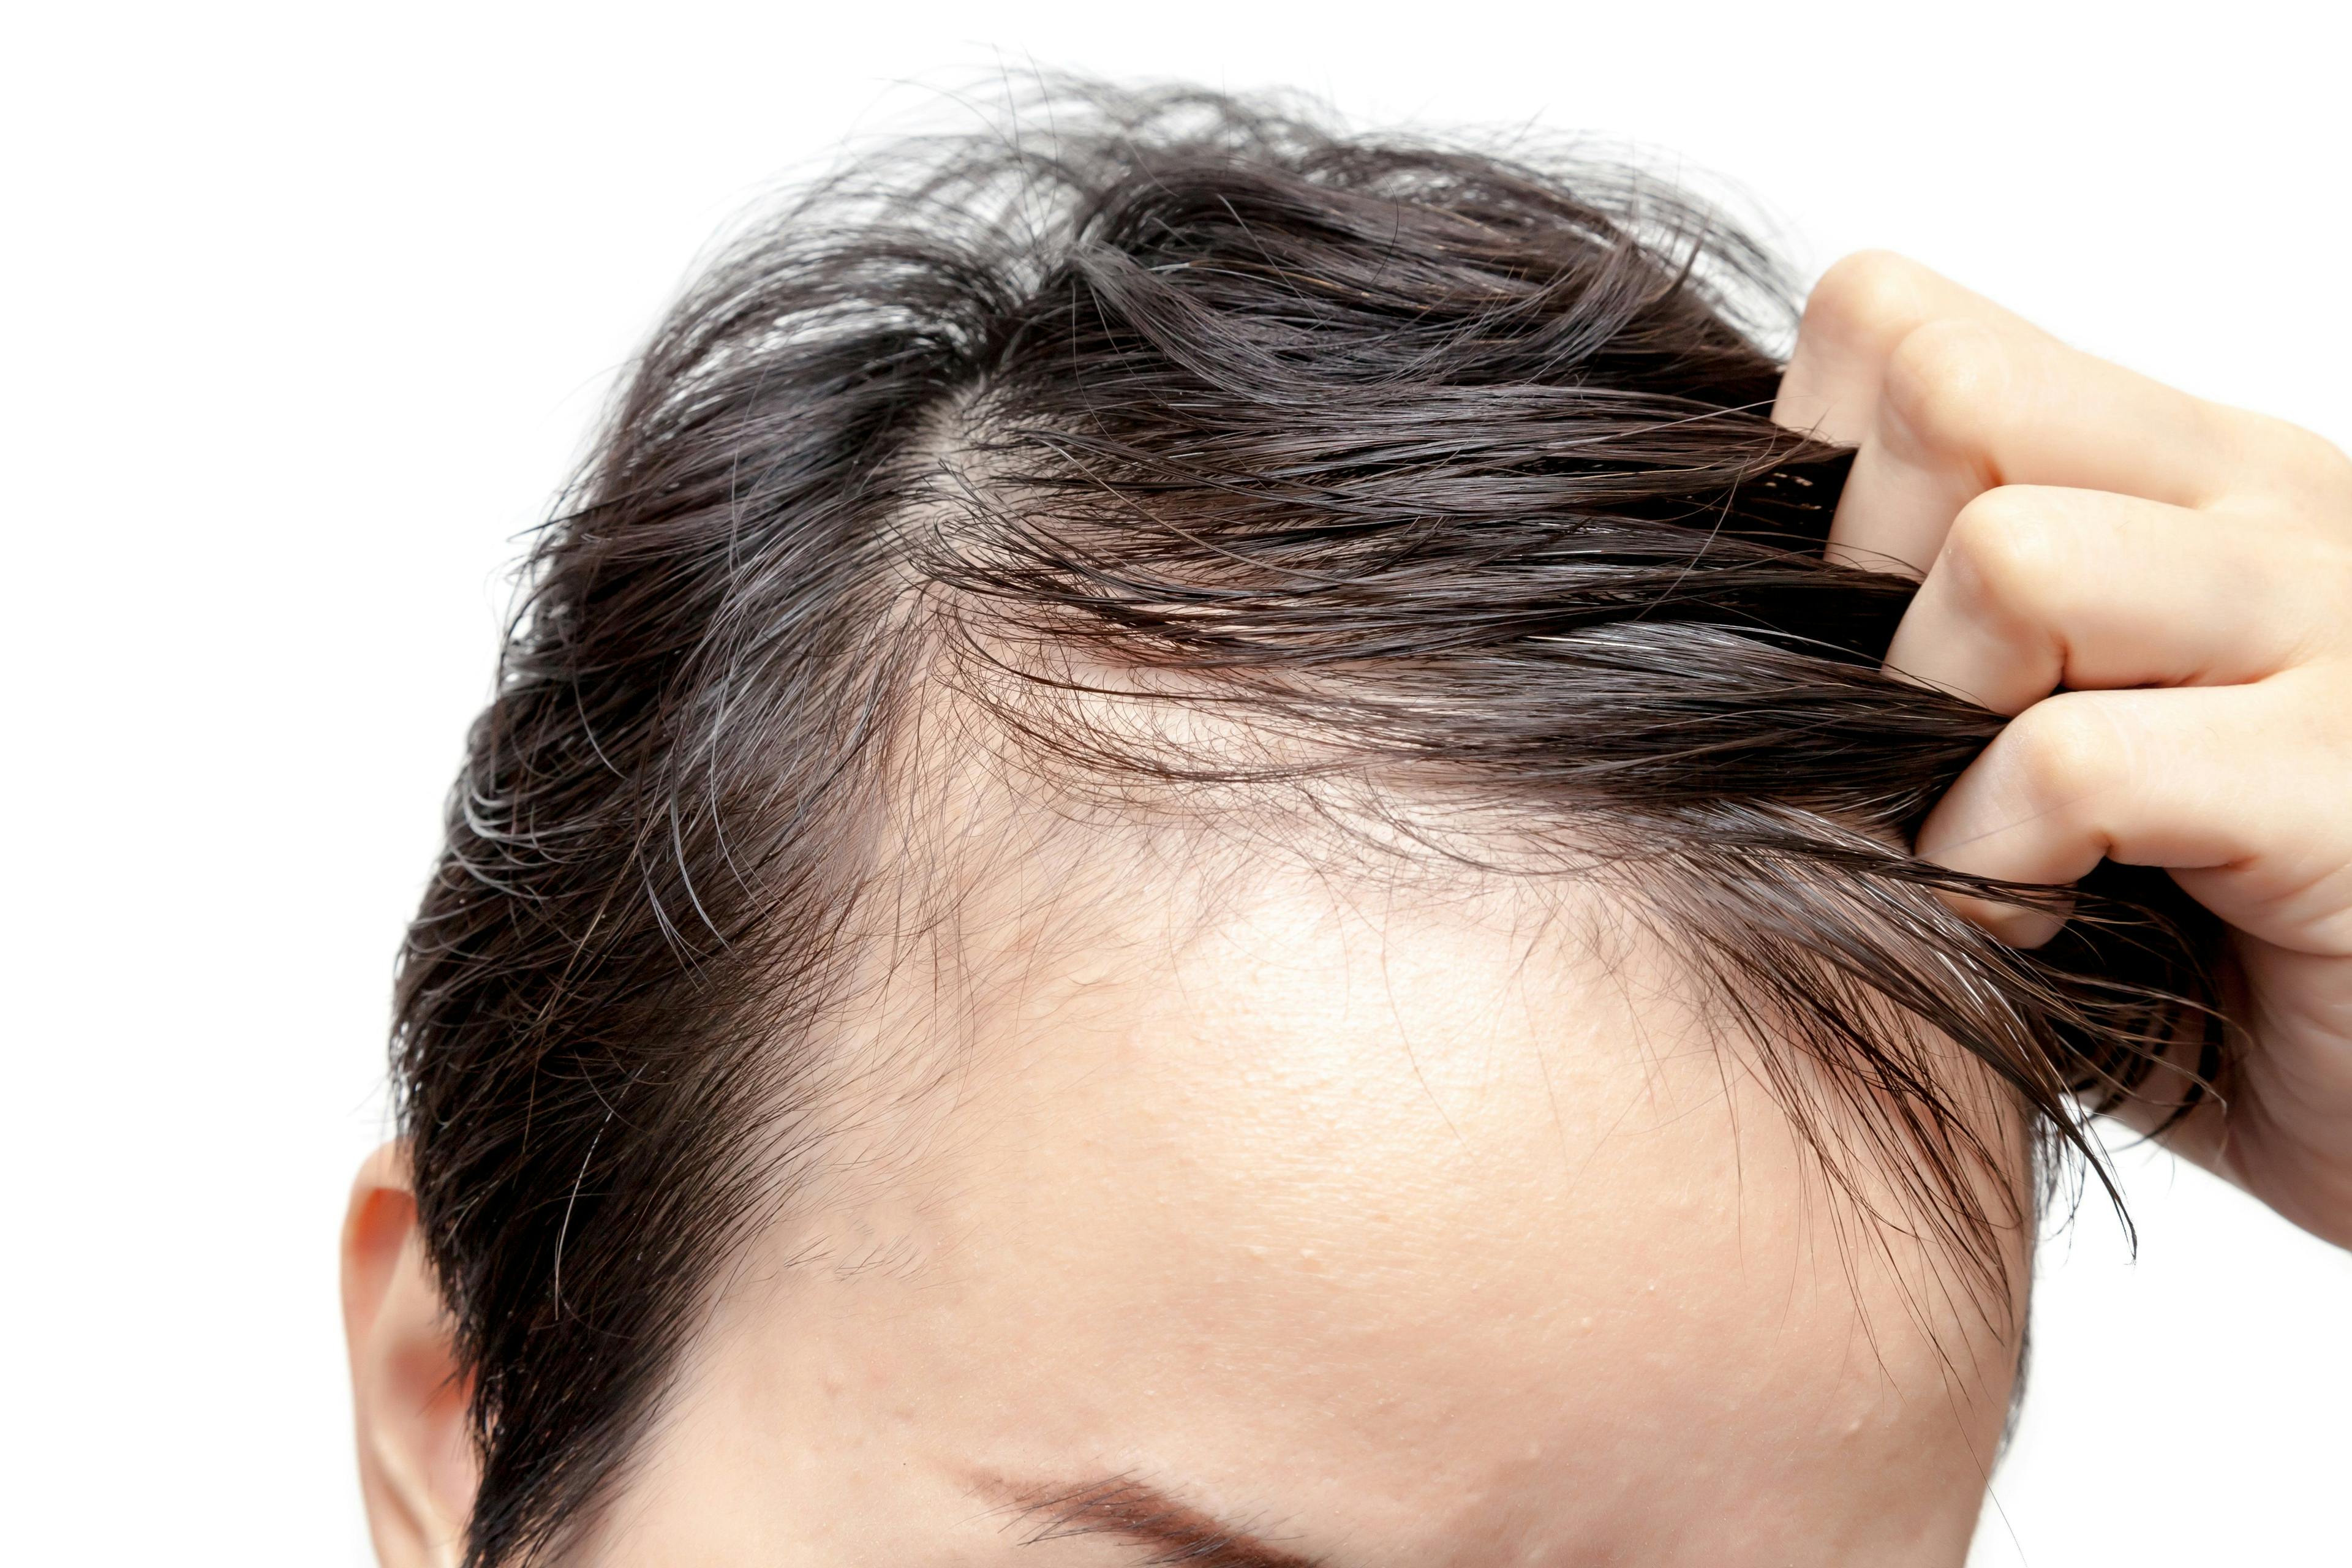 Oral JAK Inhibitors, Steroids Do Not Significantly Differ in Alopecia Hair Regrowth